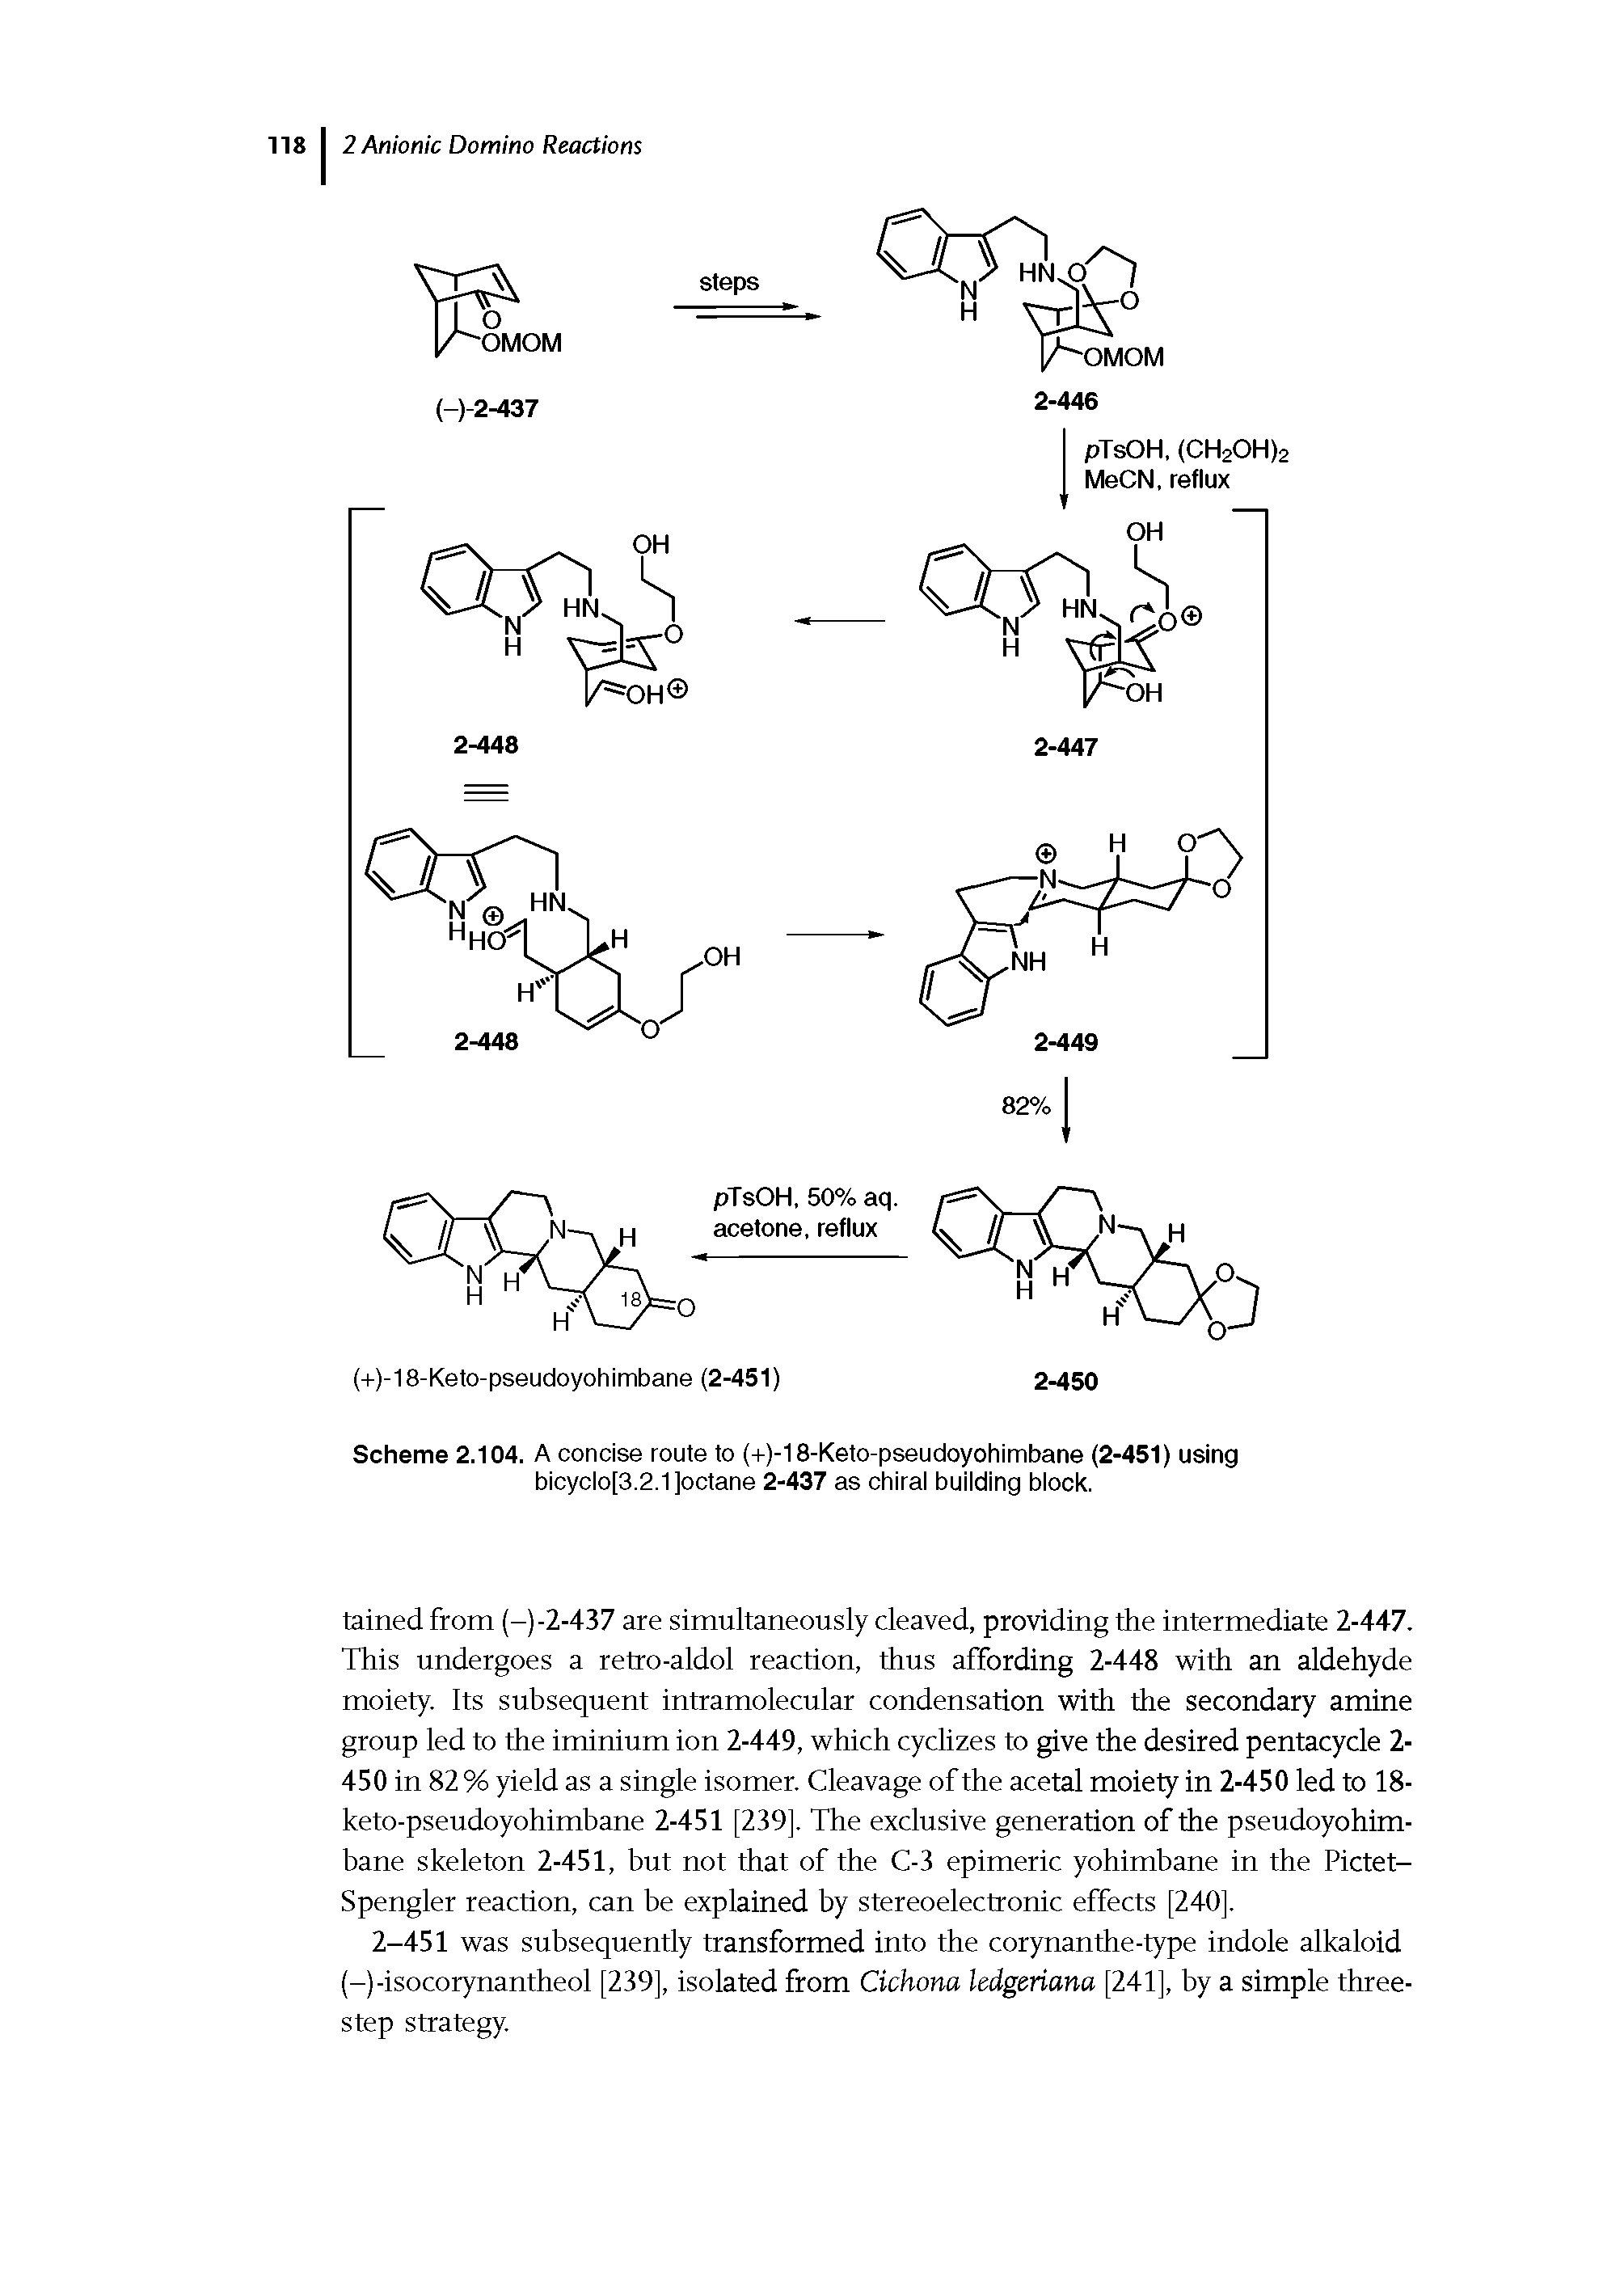 Scheme 2.104. A concise route to (+)-18-Keto-pseudoyohimbane (2-451) using bicyclo[3.2.1]octane 2-437 as chiral building block.